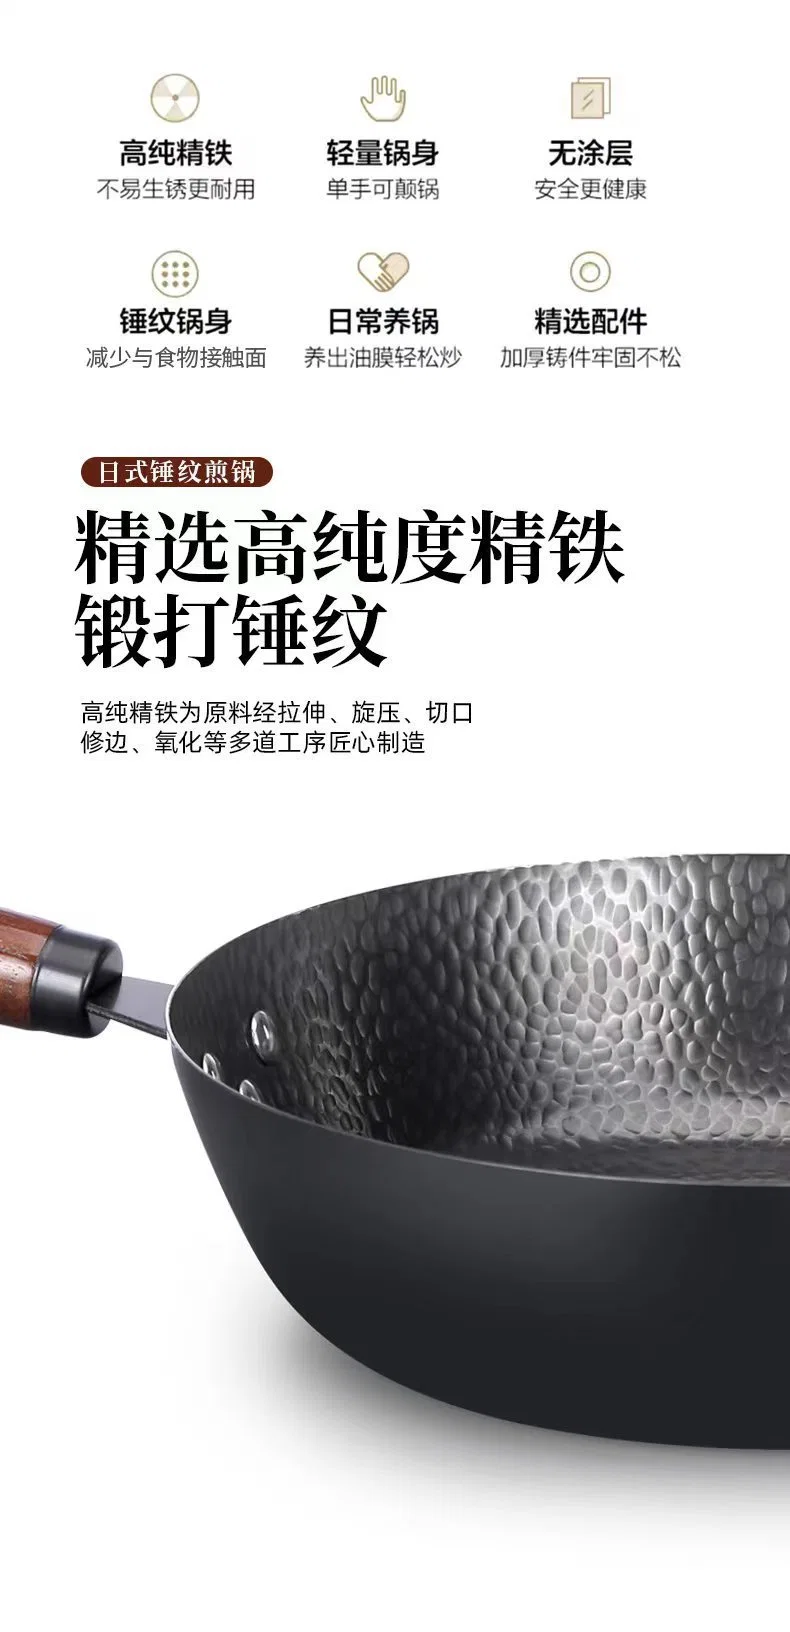 &quot;Artisan Hand-Forged Hammered Wok - Zhanqiu Iron Pan with No Coating, Non-Stick Frying Pan Flat-Bottomed Pan for Induction Cooktops and Gas Stoves&quot;